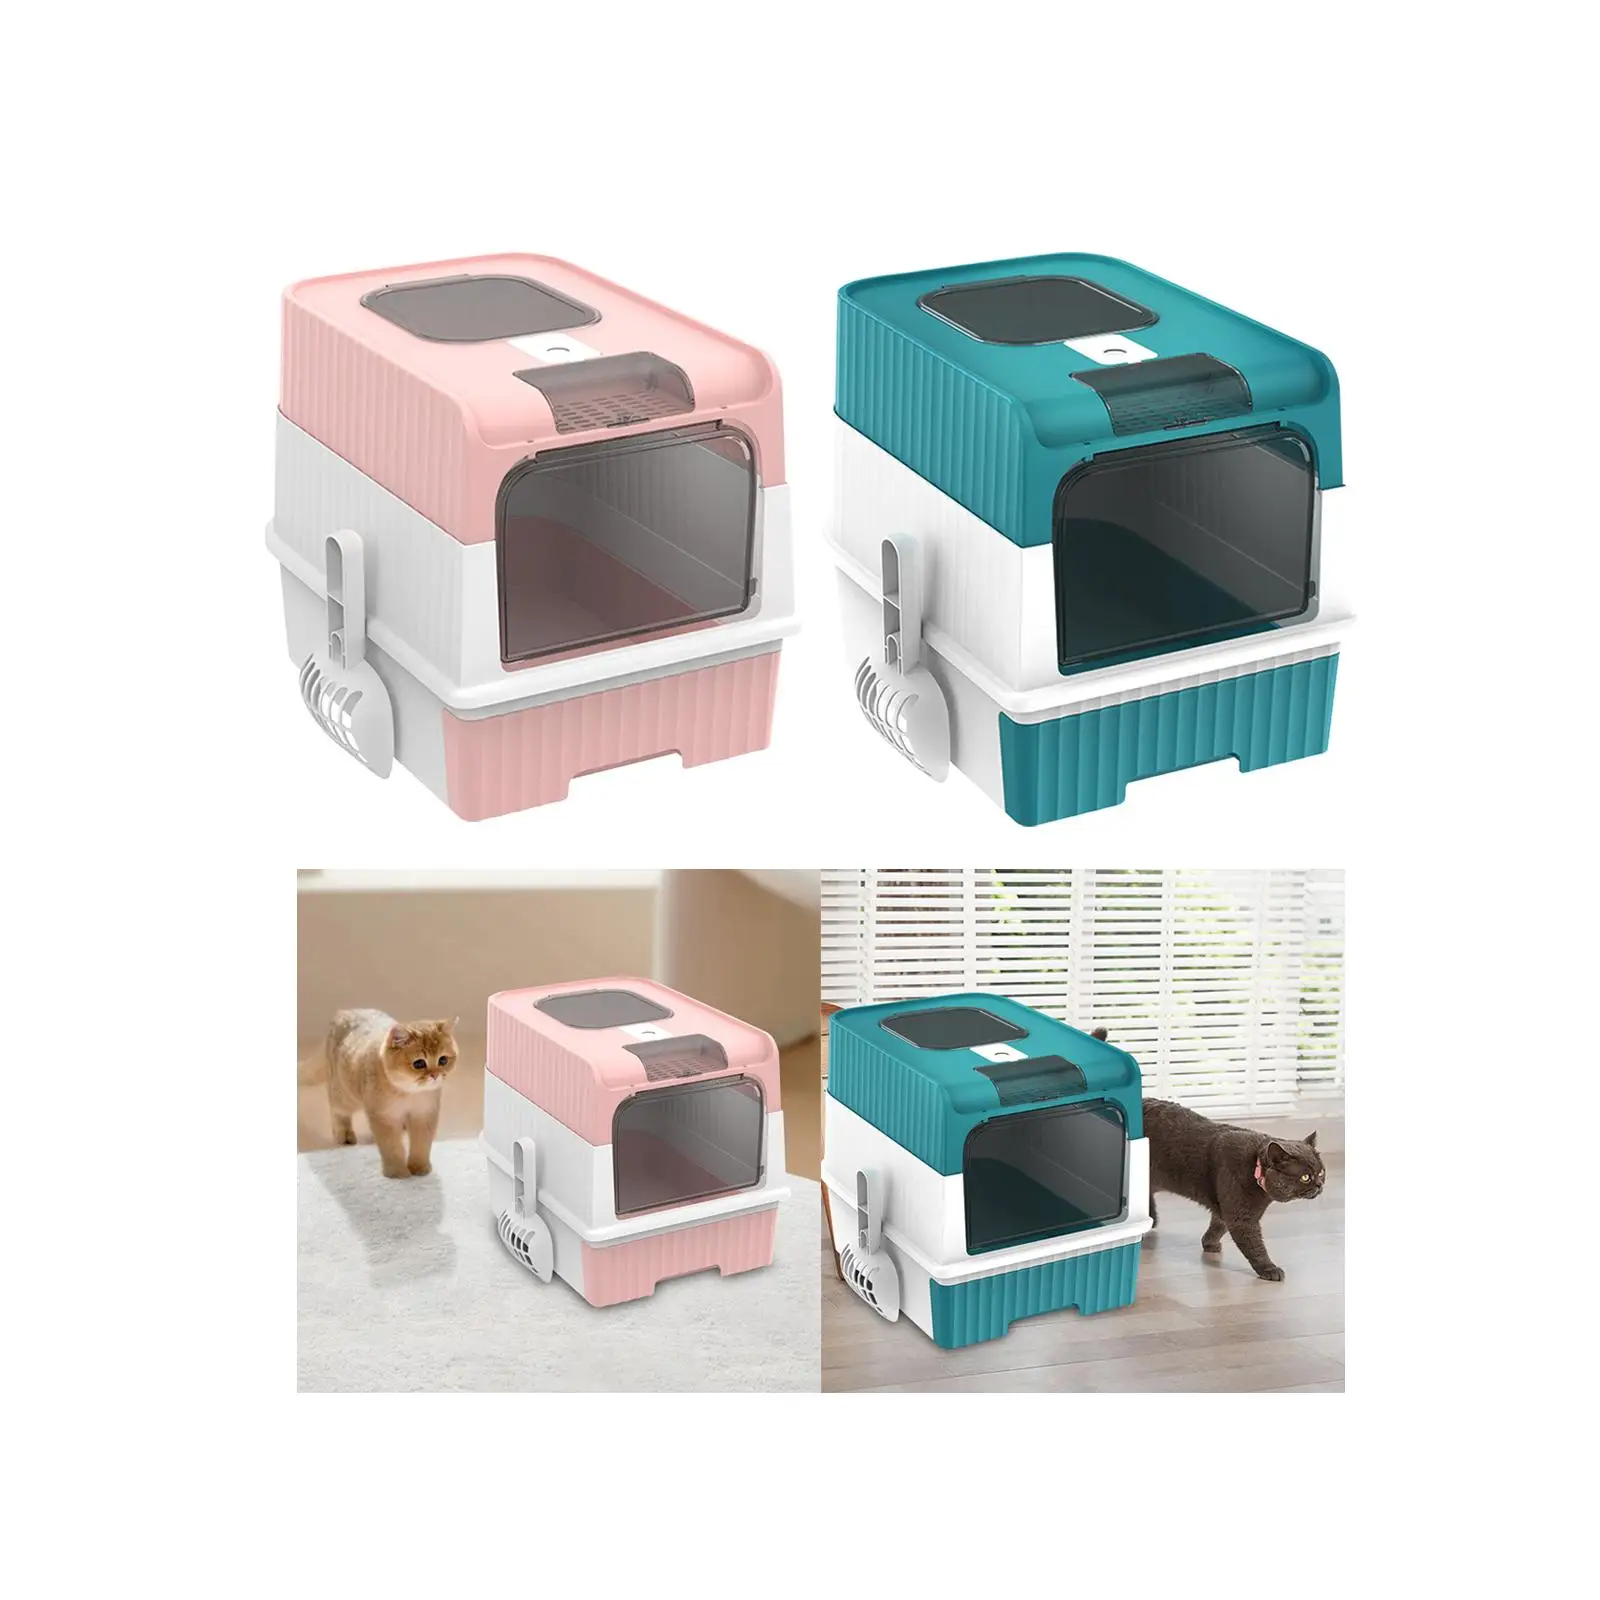 Hooded Cat Litter Boxes Detachable Pet Litter Tray Pet Supplies Cat Litter Tray for Small, Medium and Large Cat Pet Litter Boxes